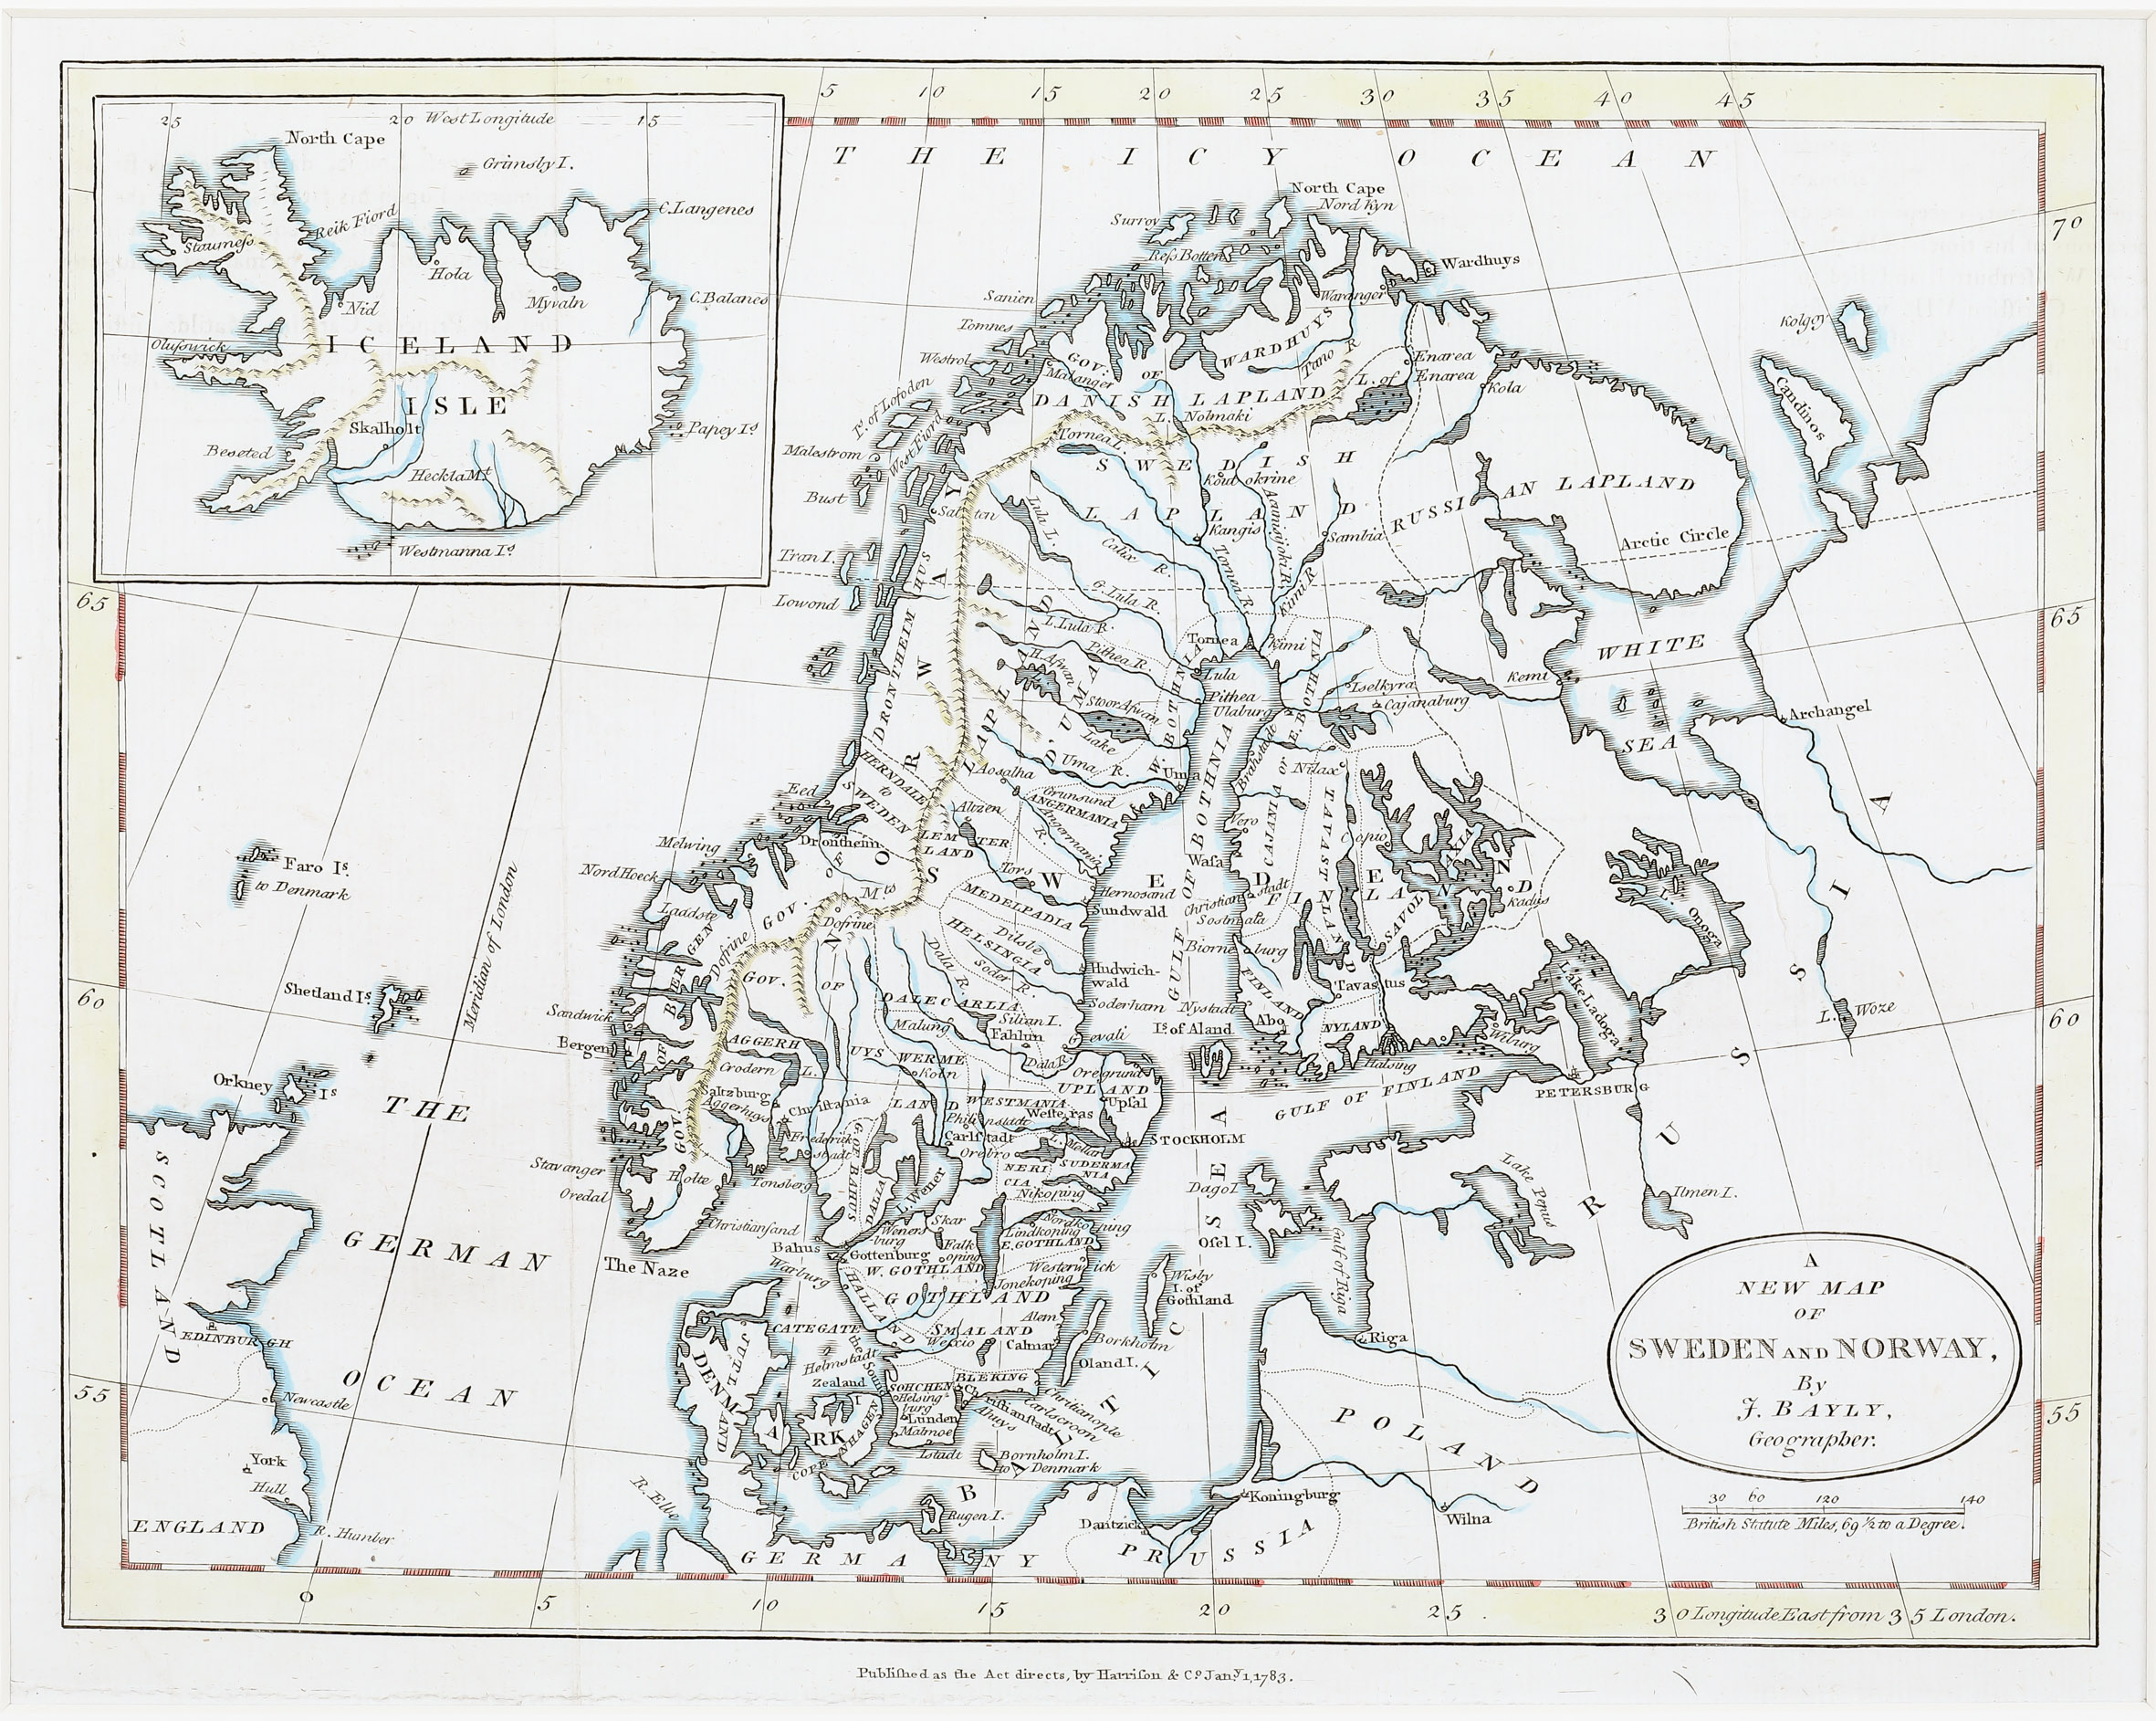 125. A New Map of Sweden and Norway